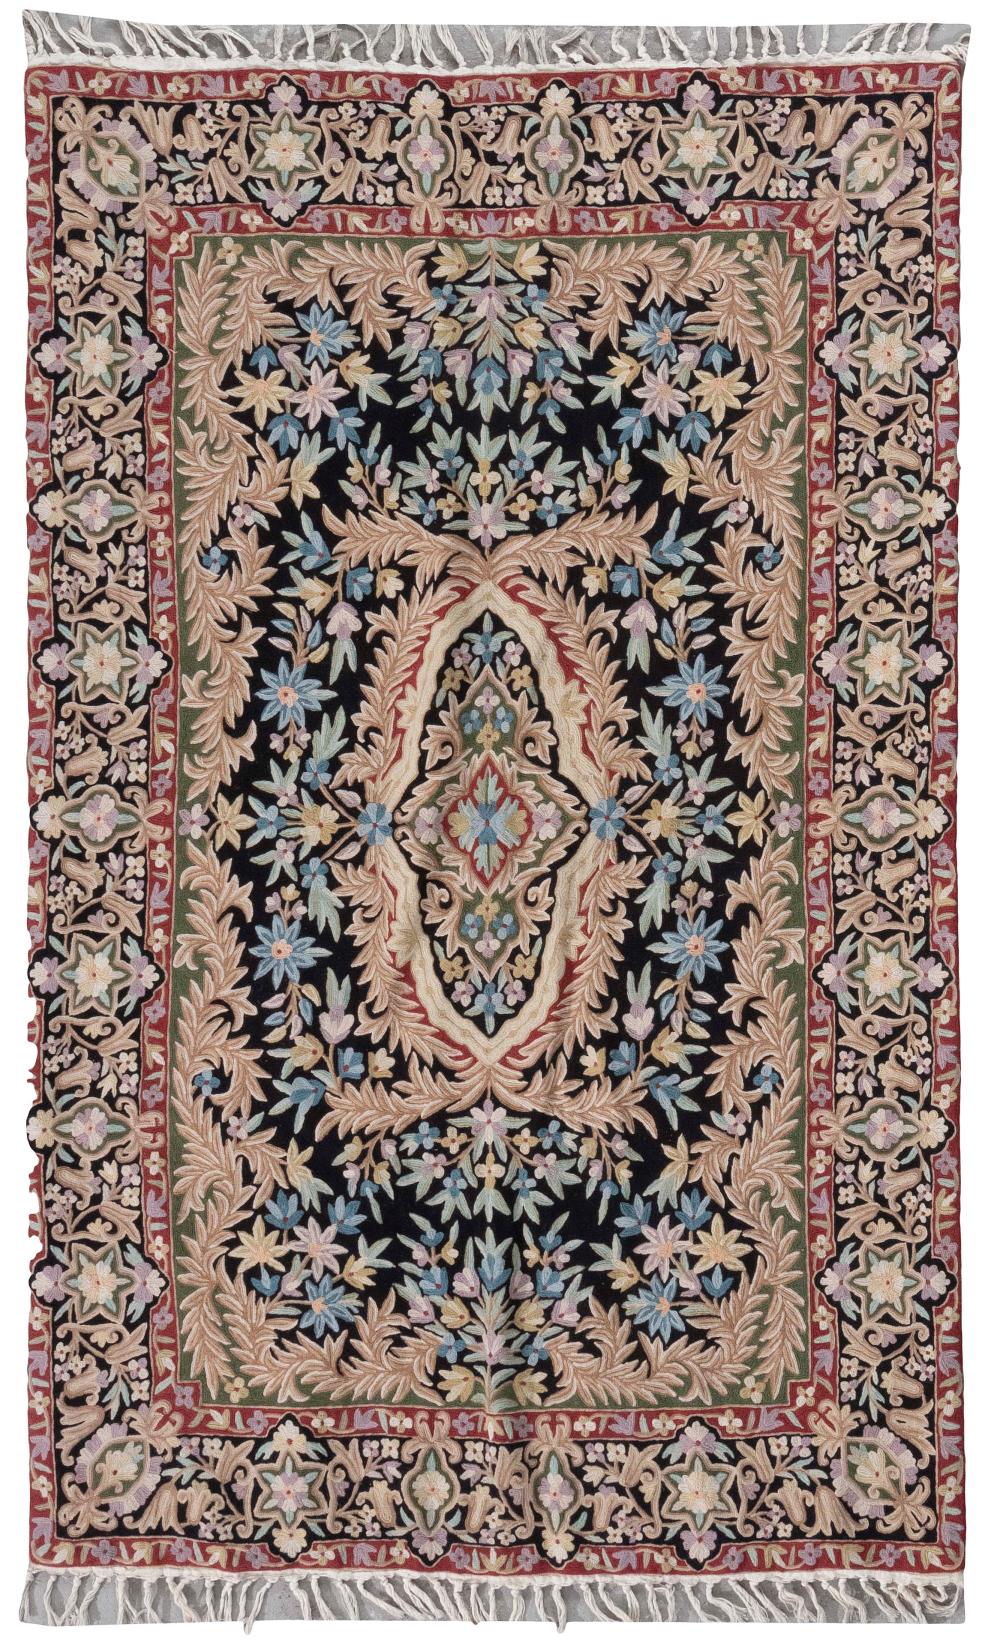 CHAIN-STITCHED RUG IN A CONTINENTAL